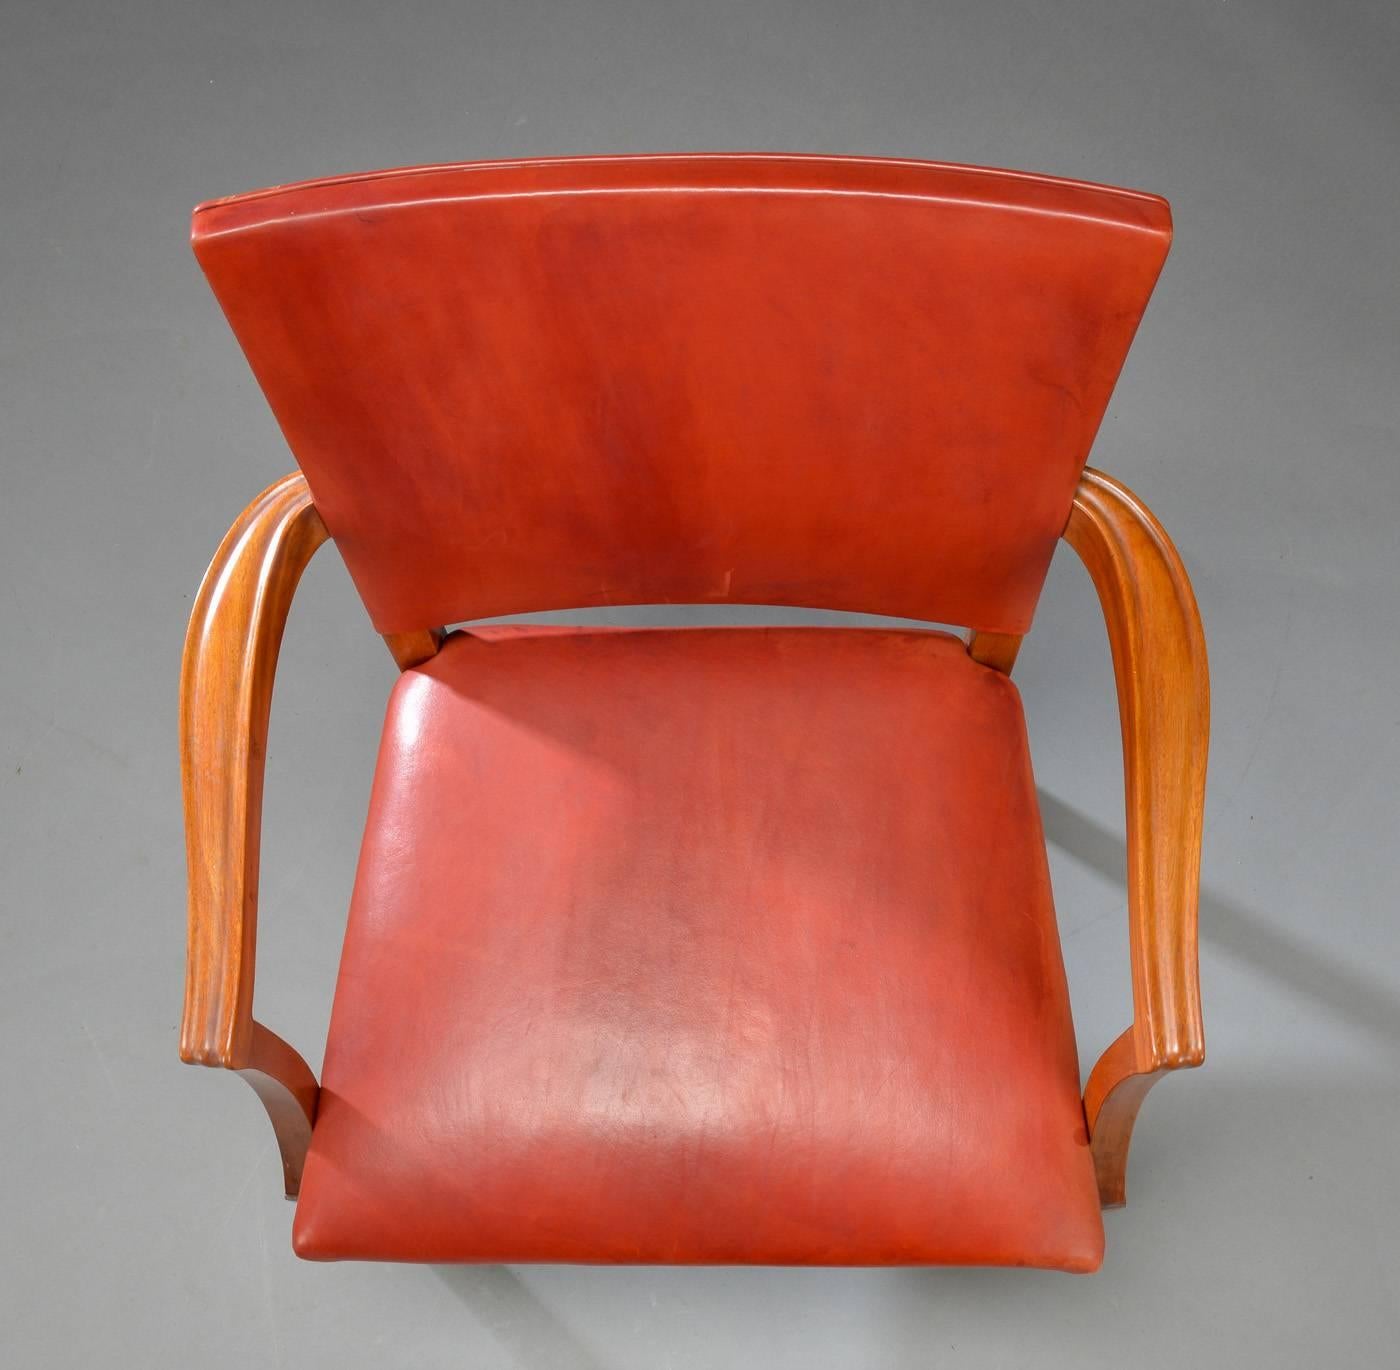 Woodwork 1935 Kaare Klint Barcelona Armchairs in Mahogany and Red Leather - Rud Rasmussen